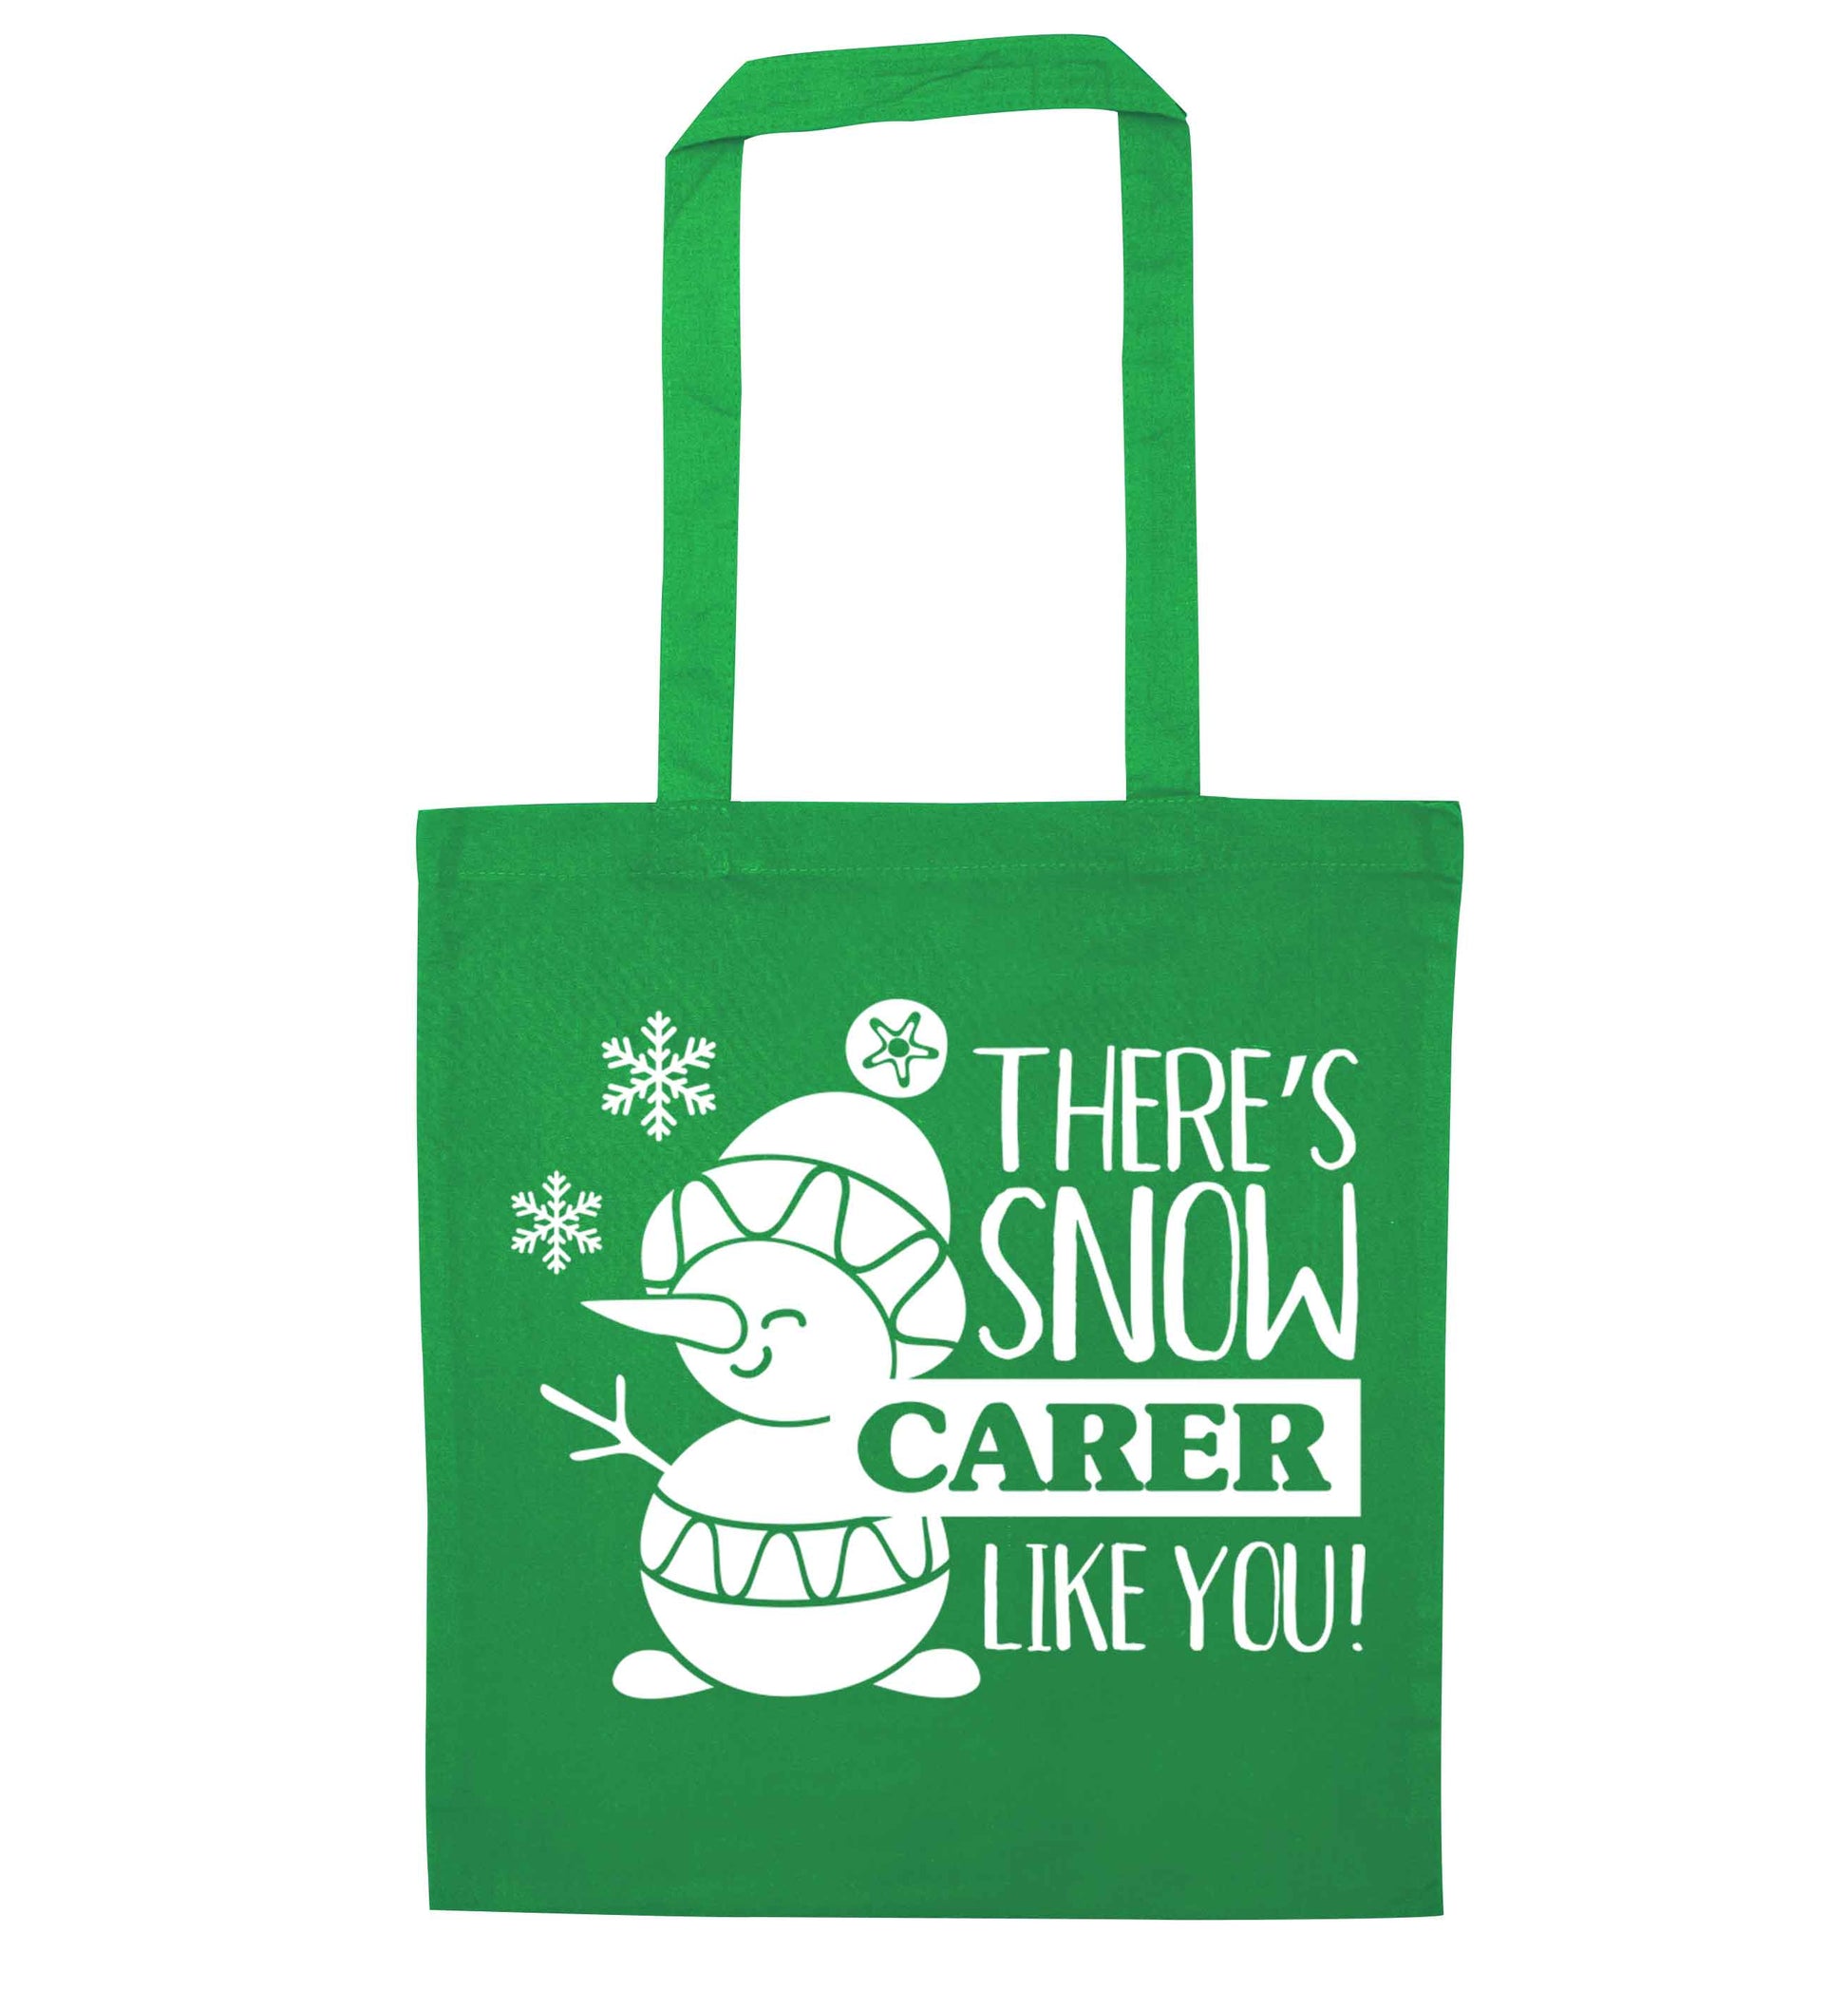 There's snow carer like you green tote bag